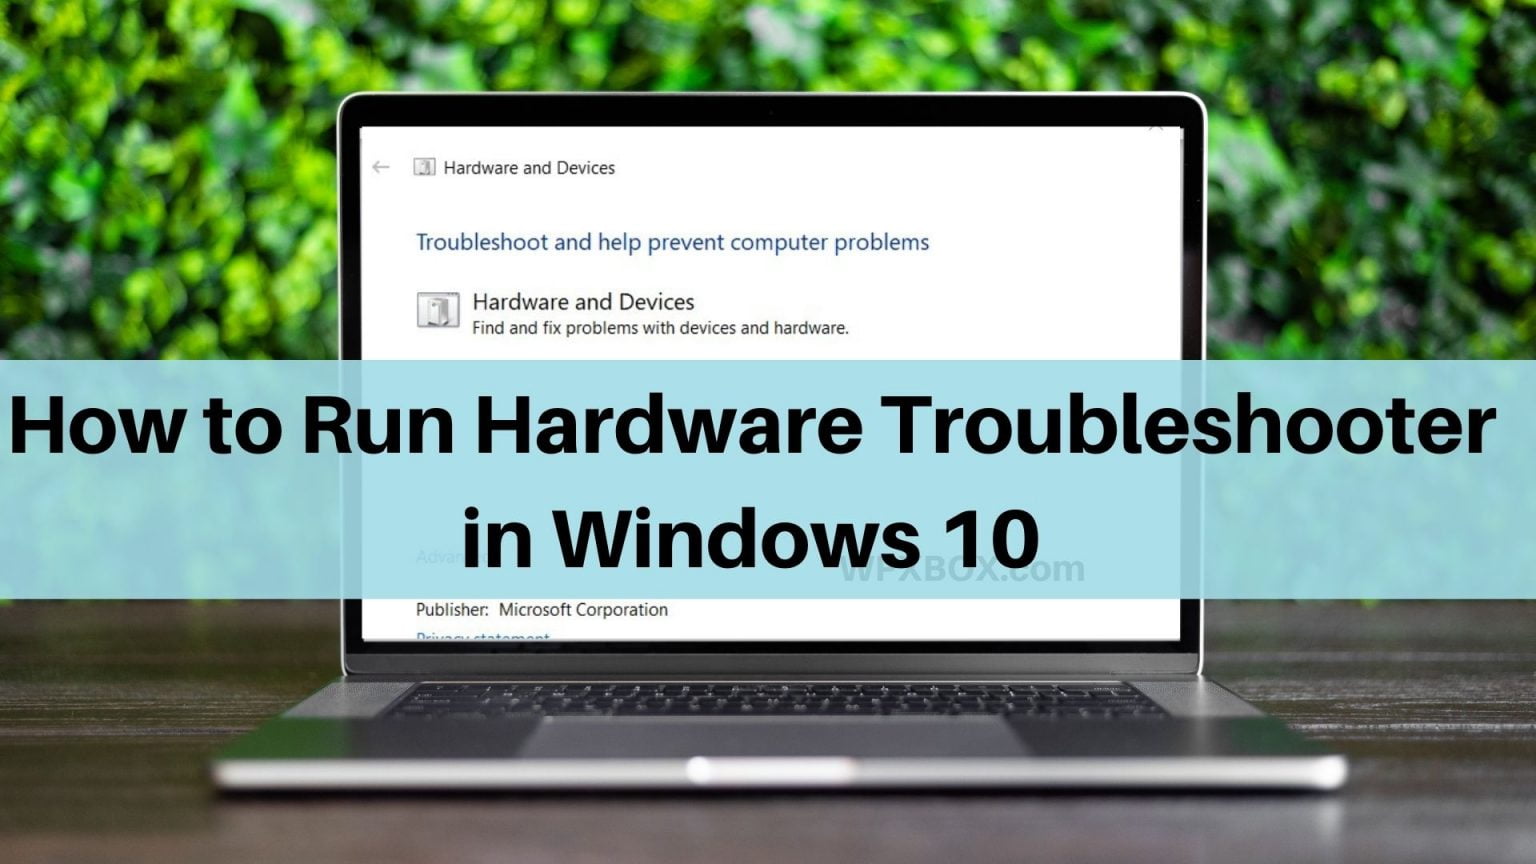 How to run Hardware Troubleshooter in Windows without Passkey